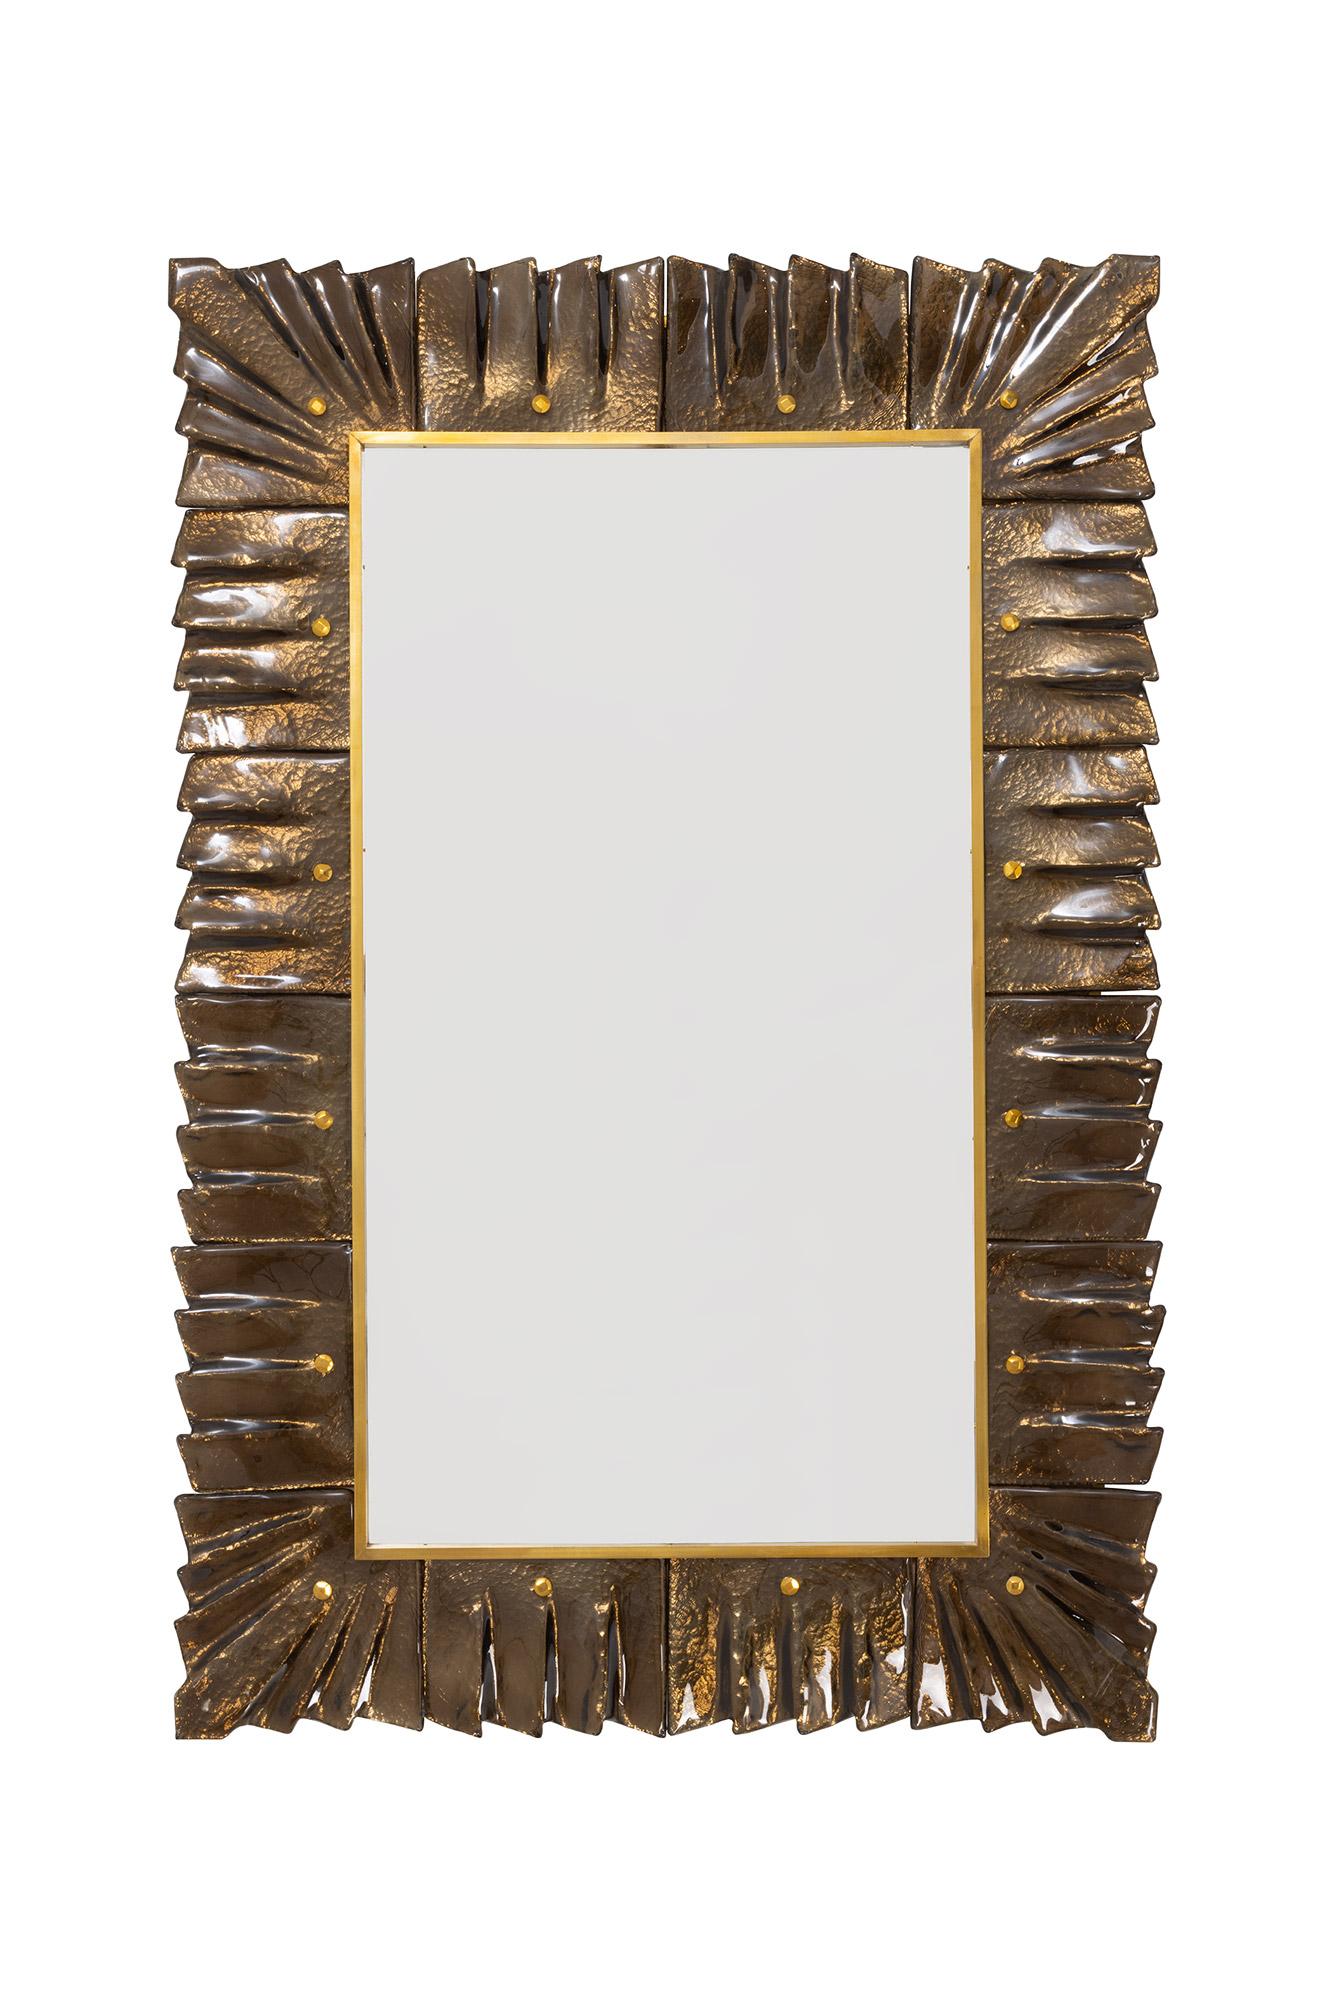 Pair of Murano amber/bronze glass framed mirrors, in stock.
Rectangular mirror plate surrounded with undulating glass tiles in amber/bronze color held by brass cabochons. 
Handcrafted by a team of artisans in Venice, Italy. 
Can be easily hung